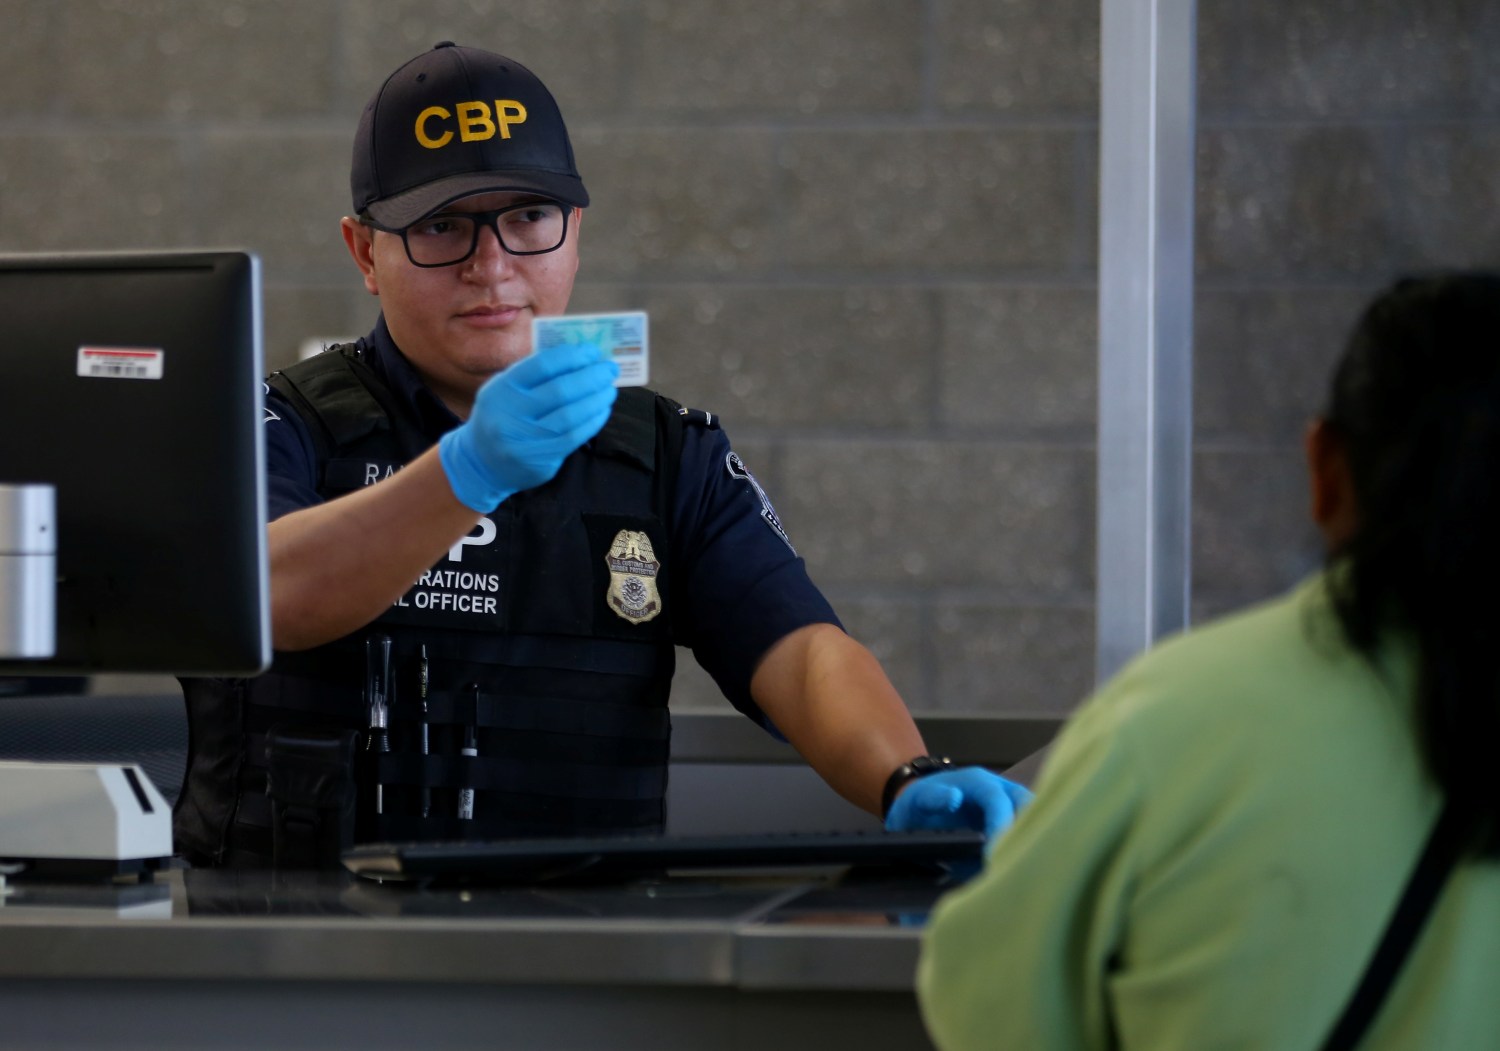 A U.S. Customs and Border Patrol officer interviews people entering the United States from Mexico at the border crossing in San Ysidro